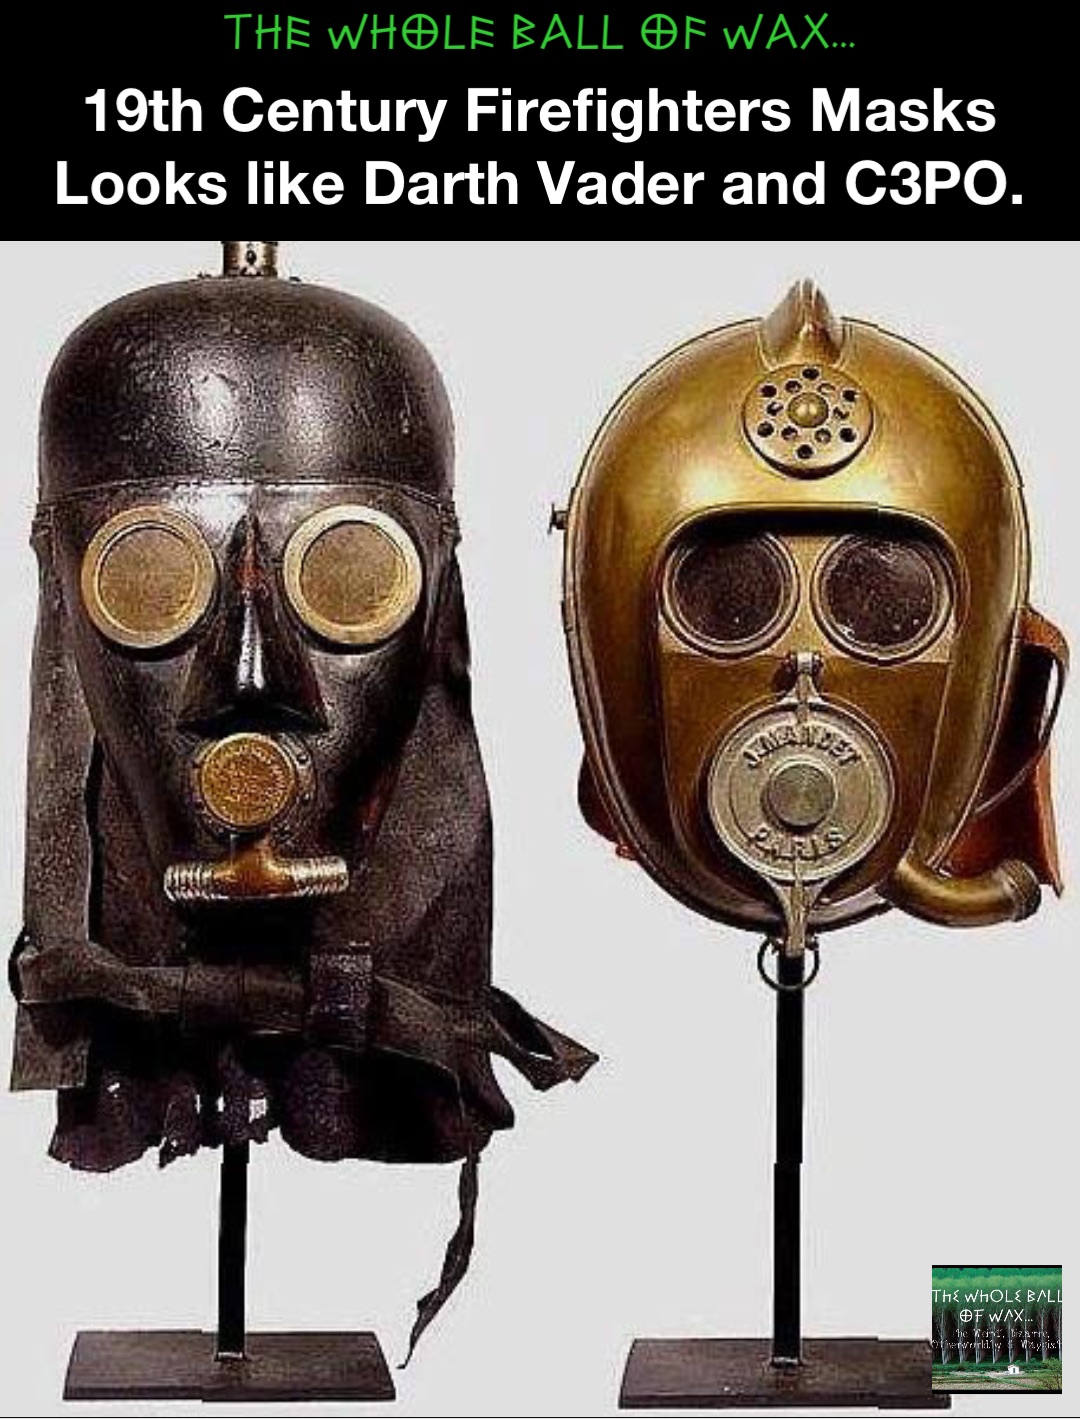 19th Century Firefighters Masks
Looks like Darth Vader and C3PO. Double tap to edit